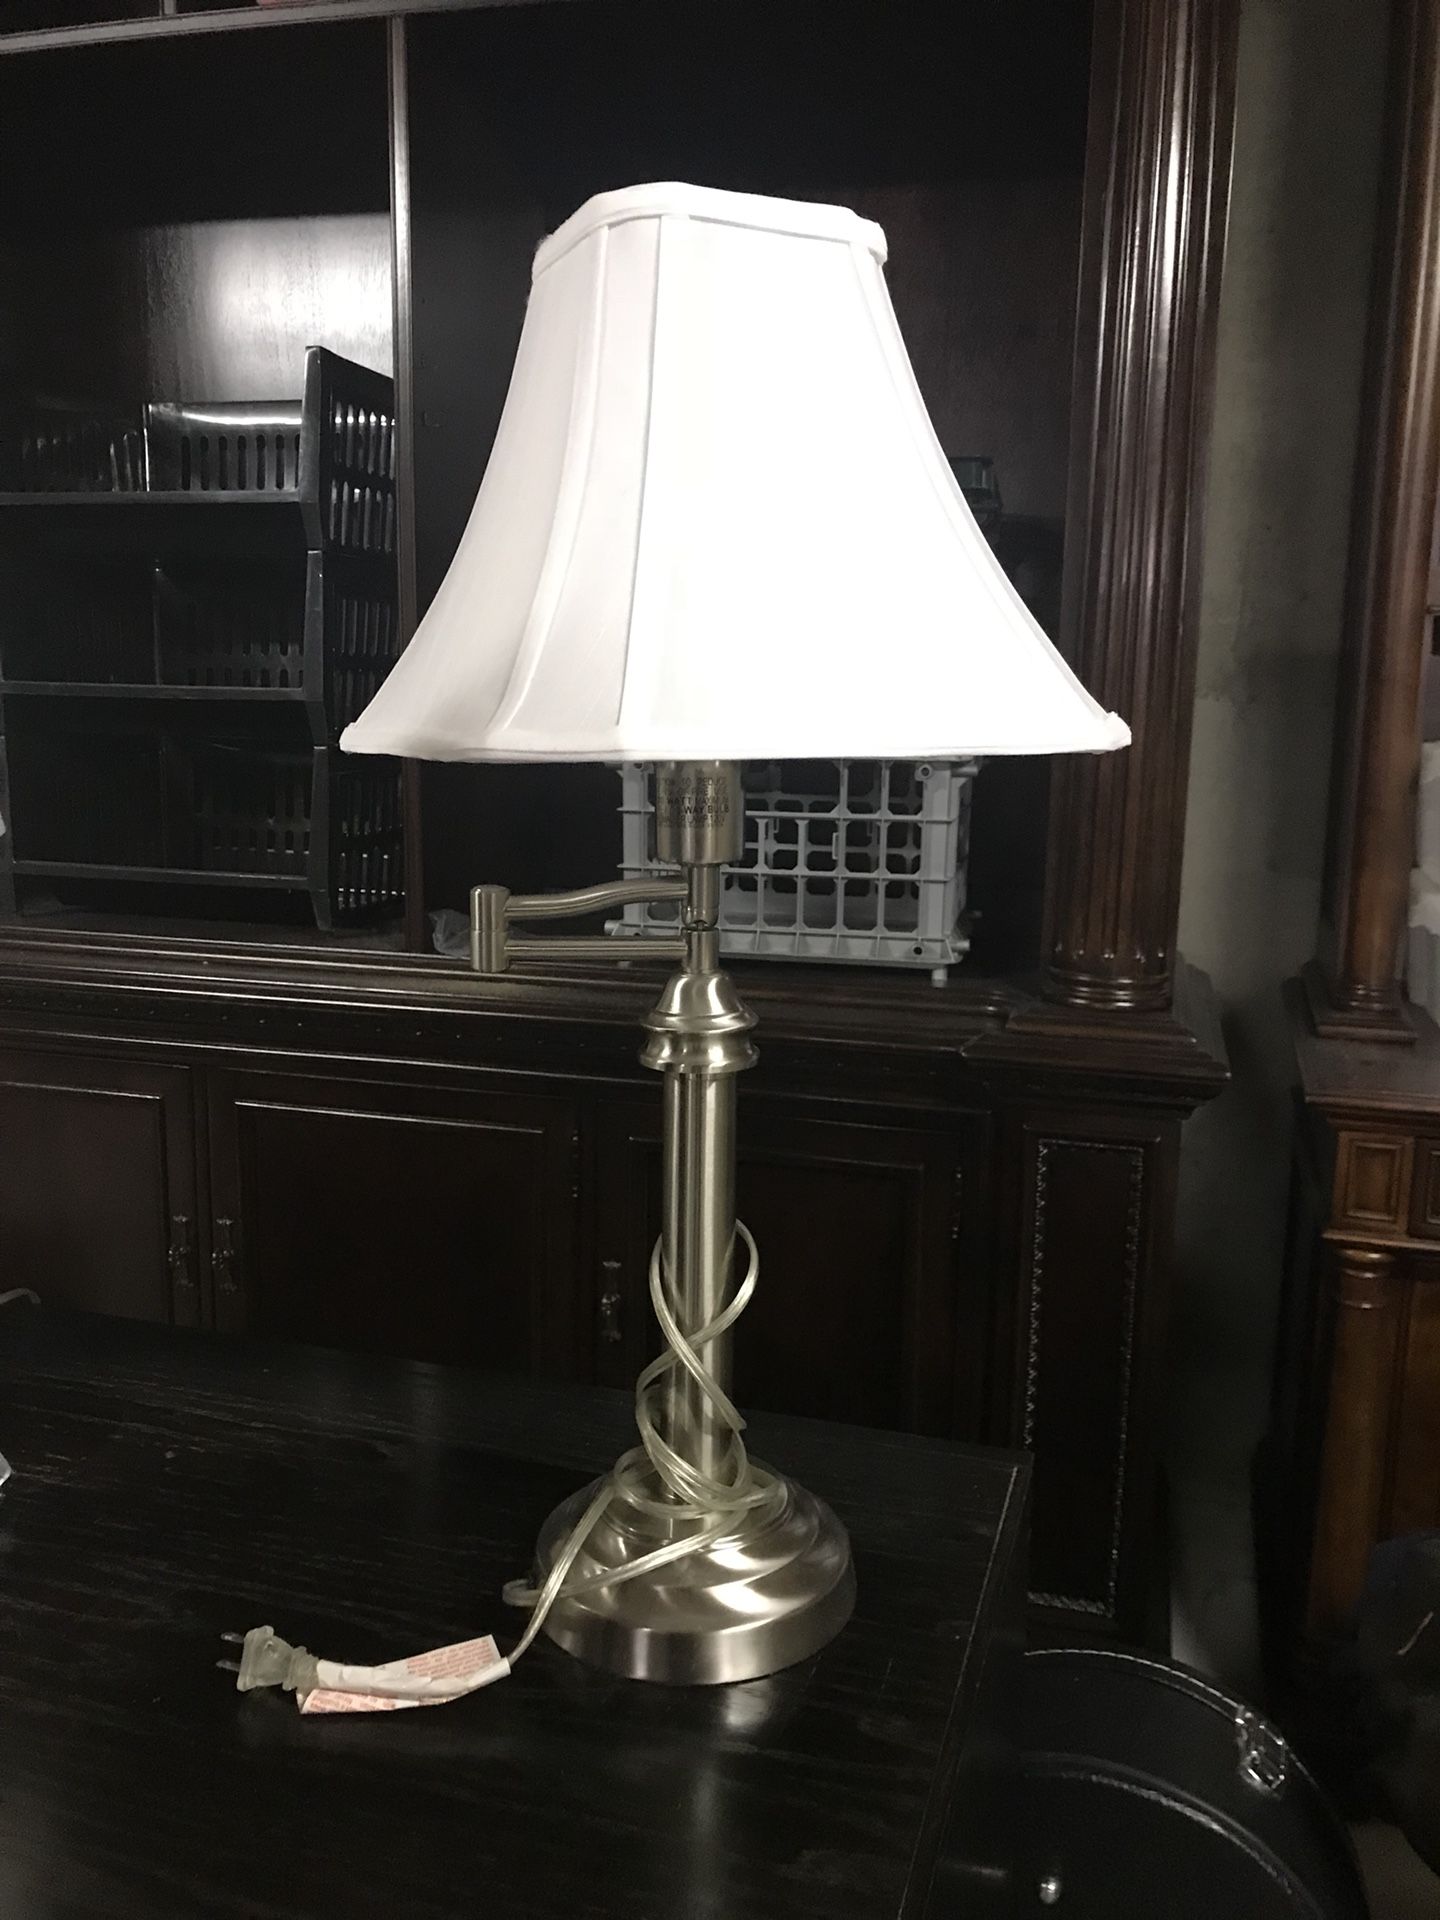 Desk lamp with arm